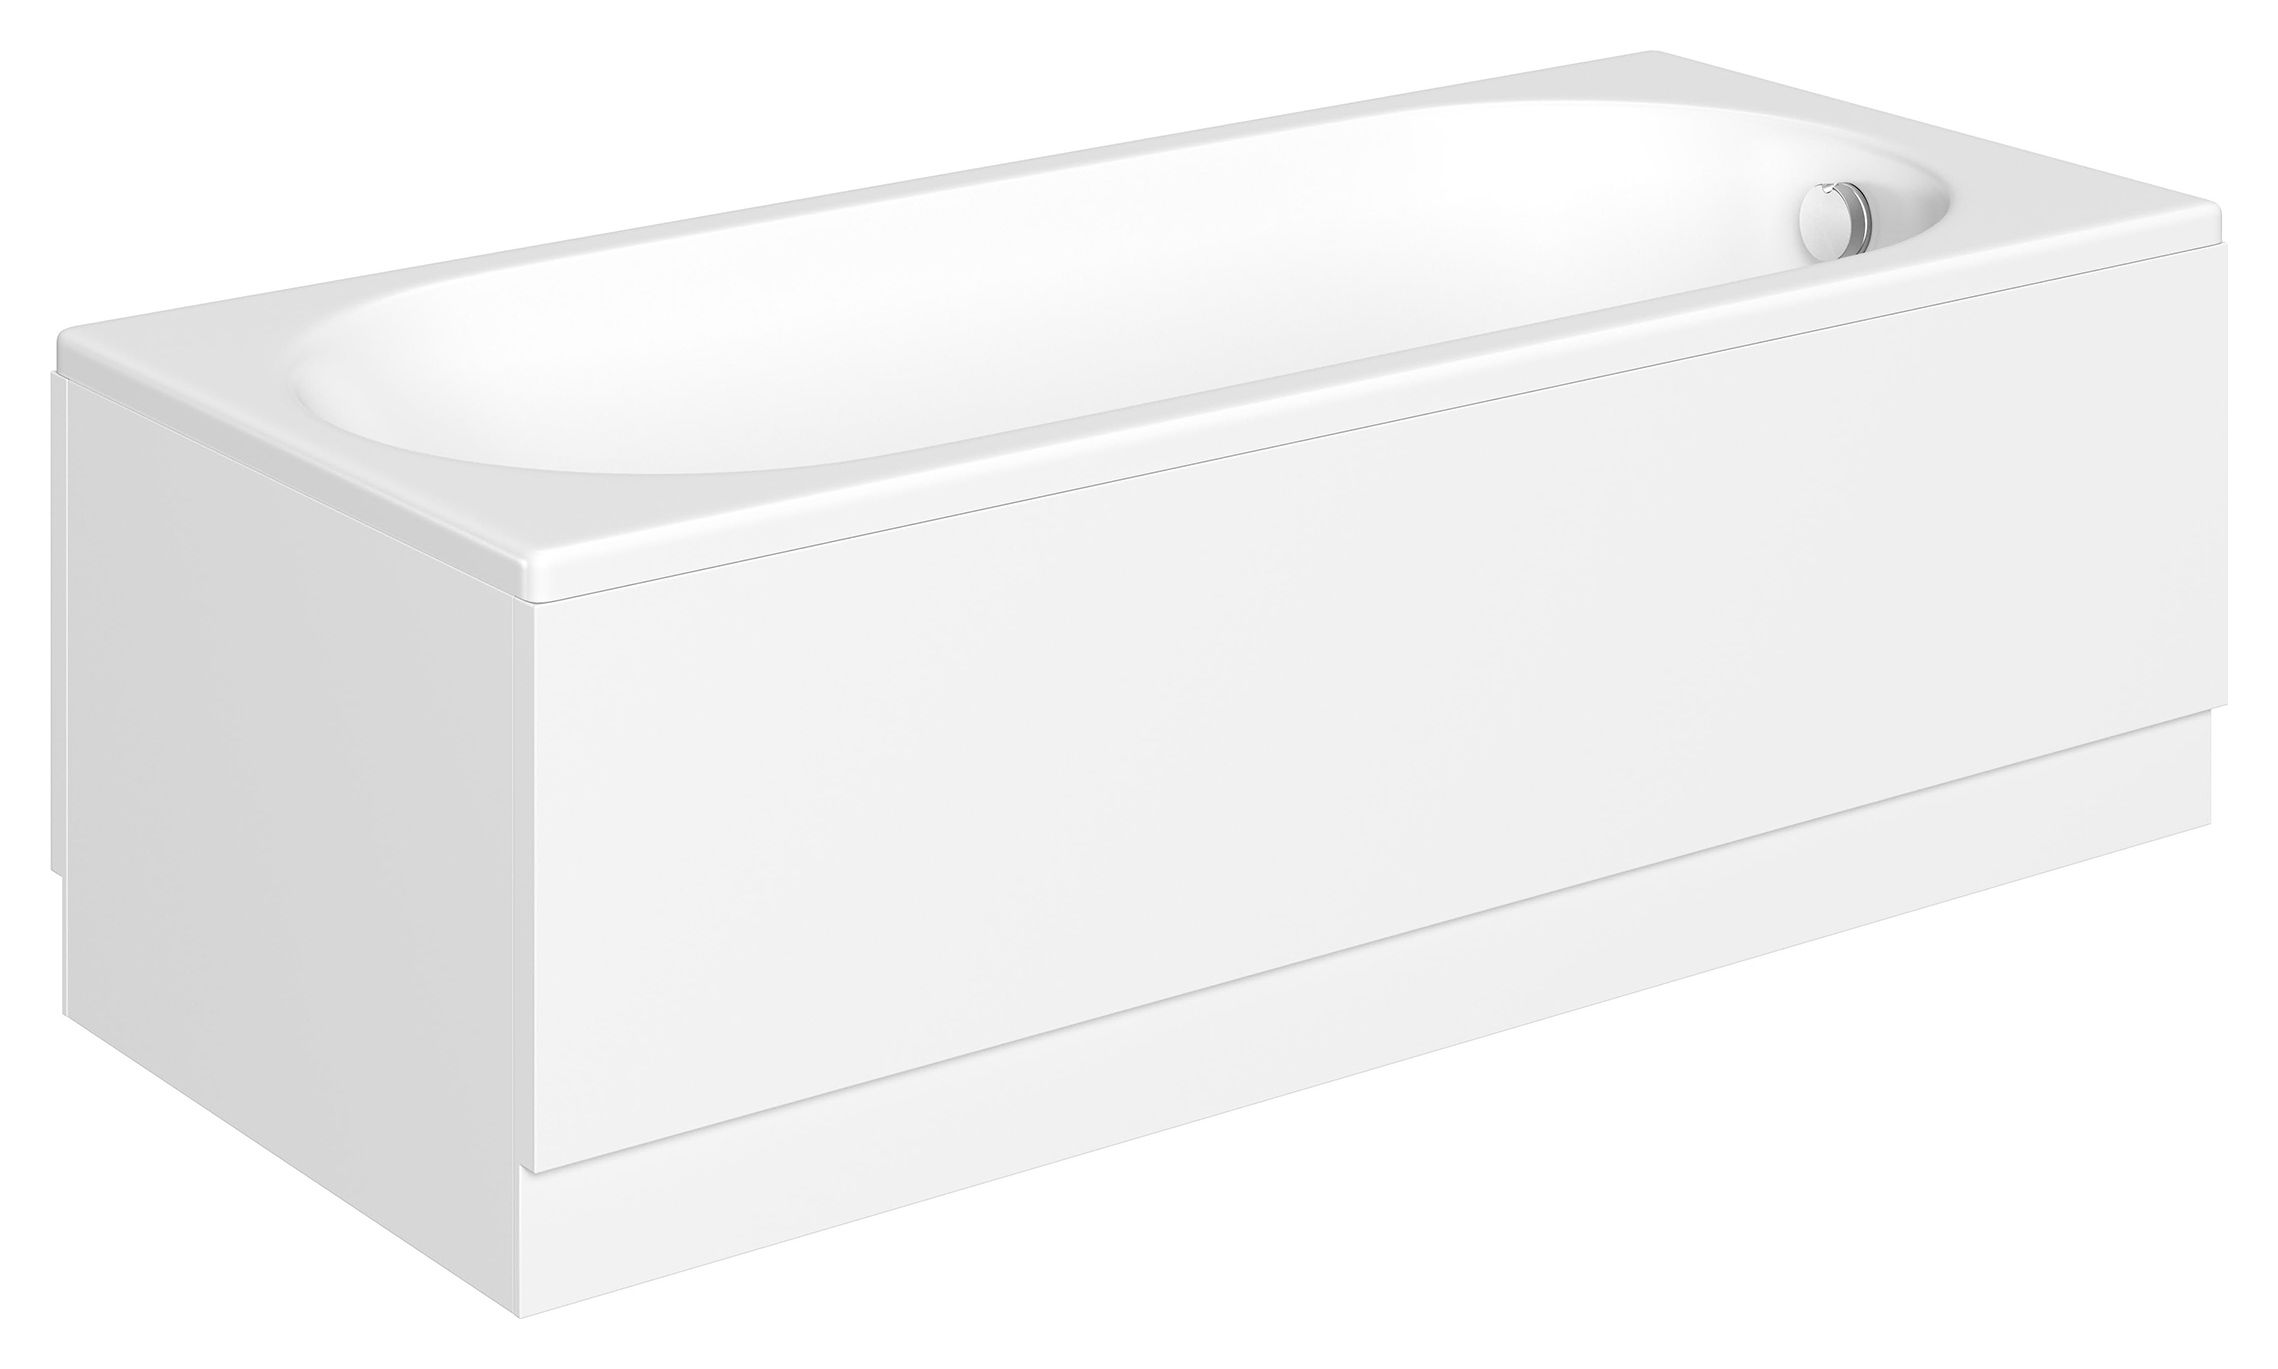 Image of Wickes Forenza Double Ended Bath - 1800 x 800mm